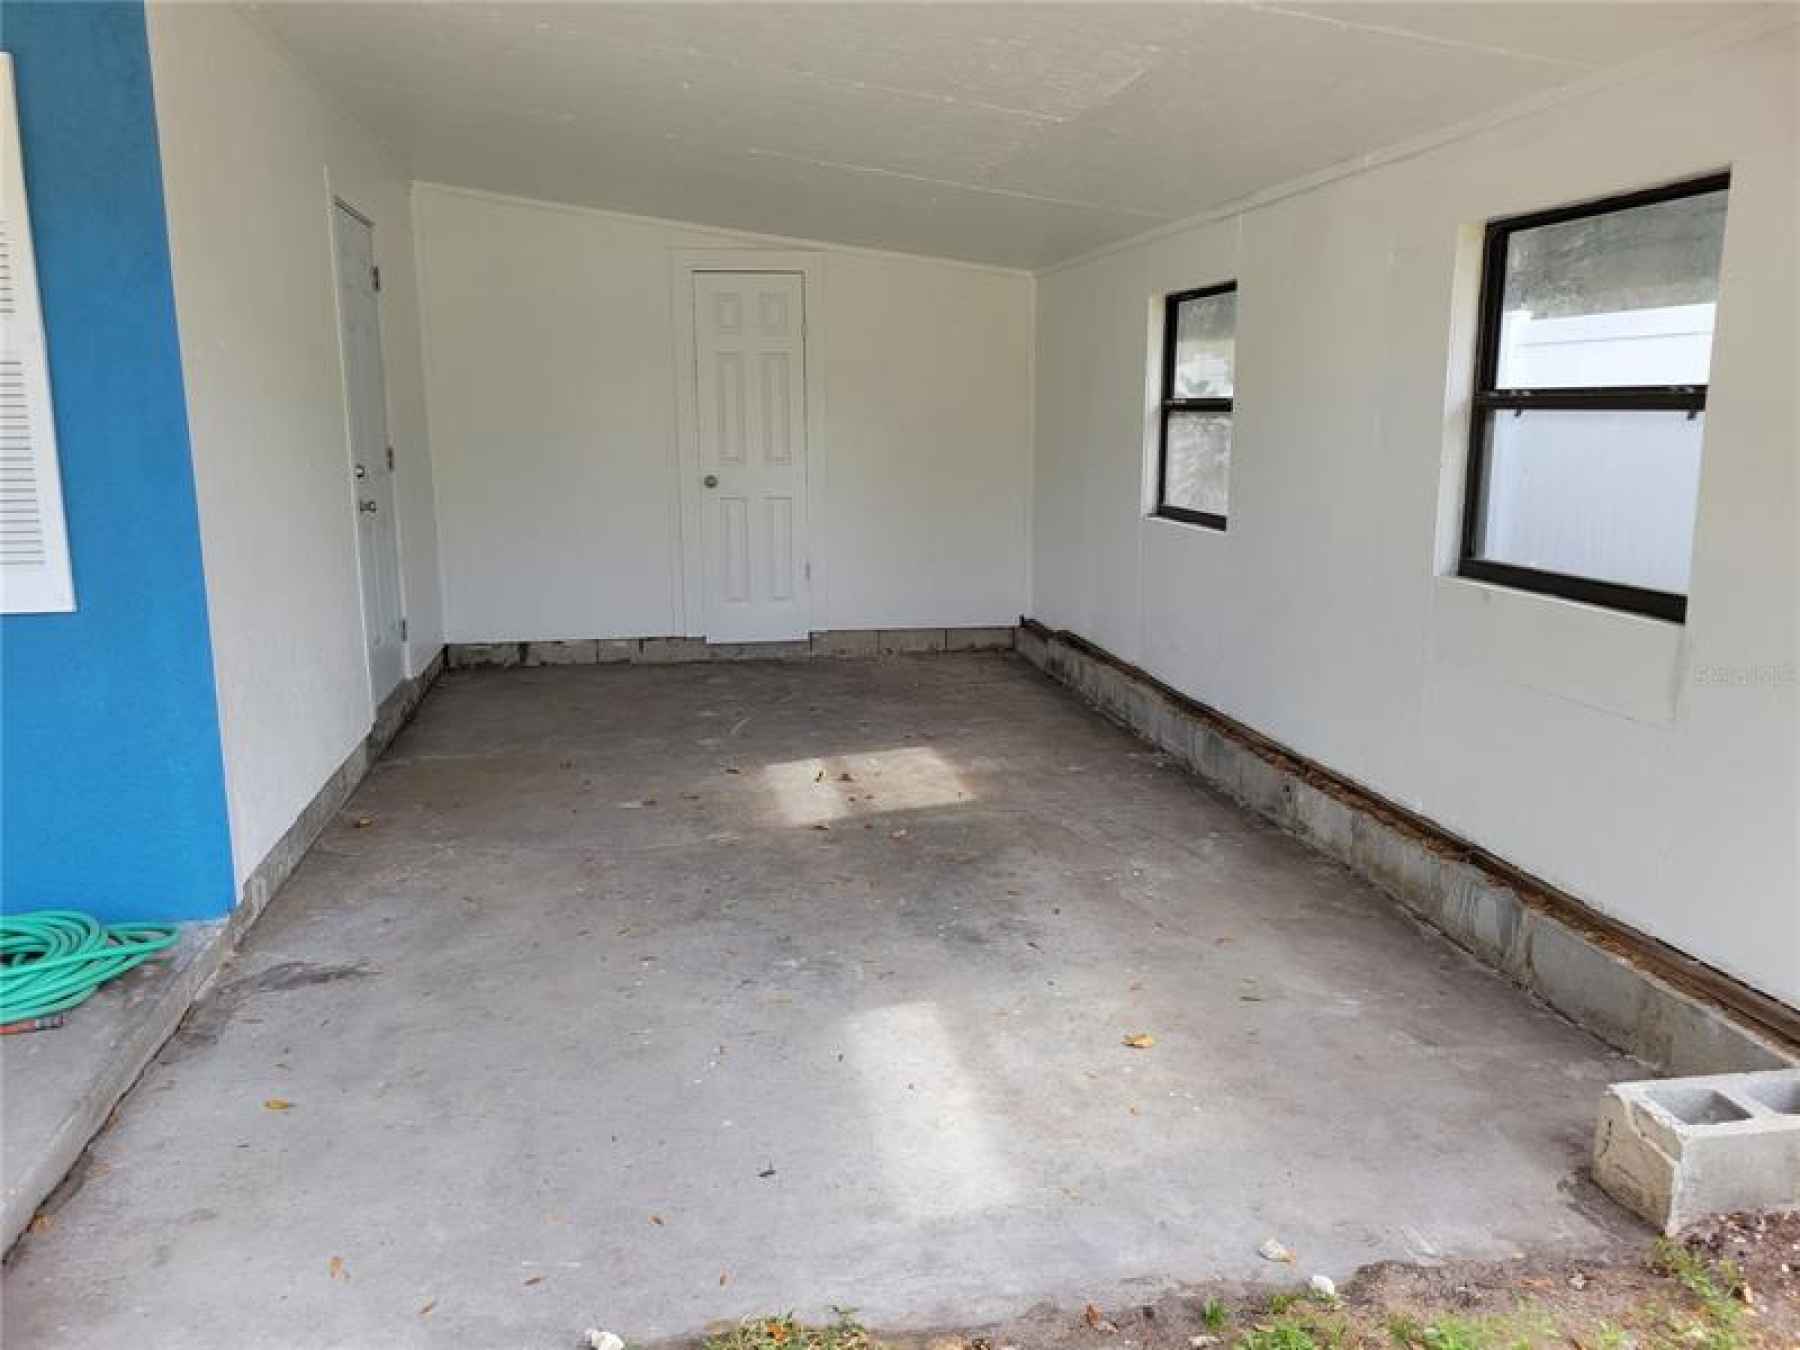 Carport with entrance to kitchen and laundry room and storage at the back